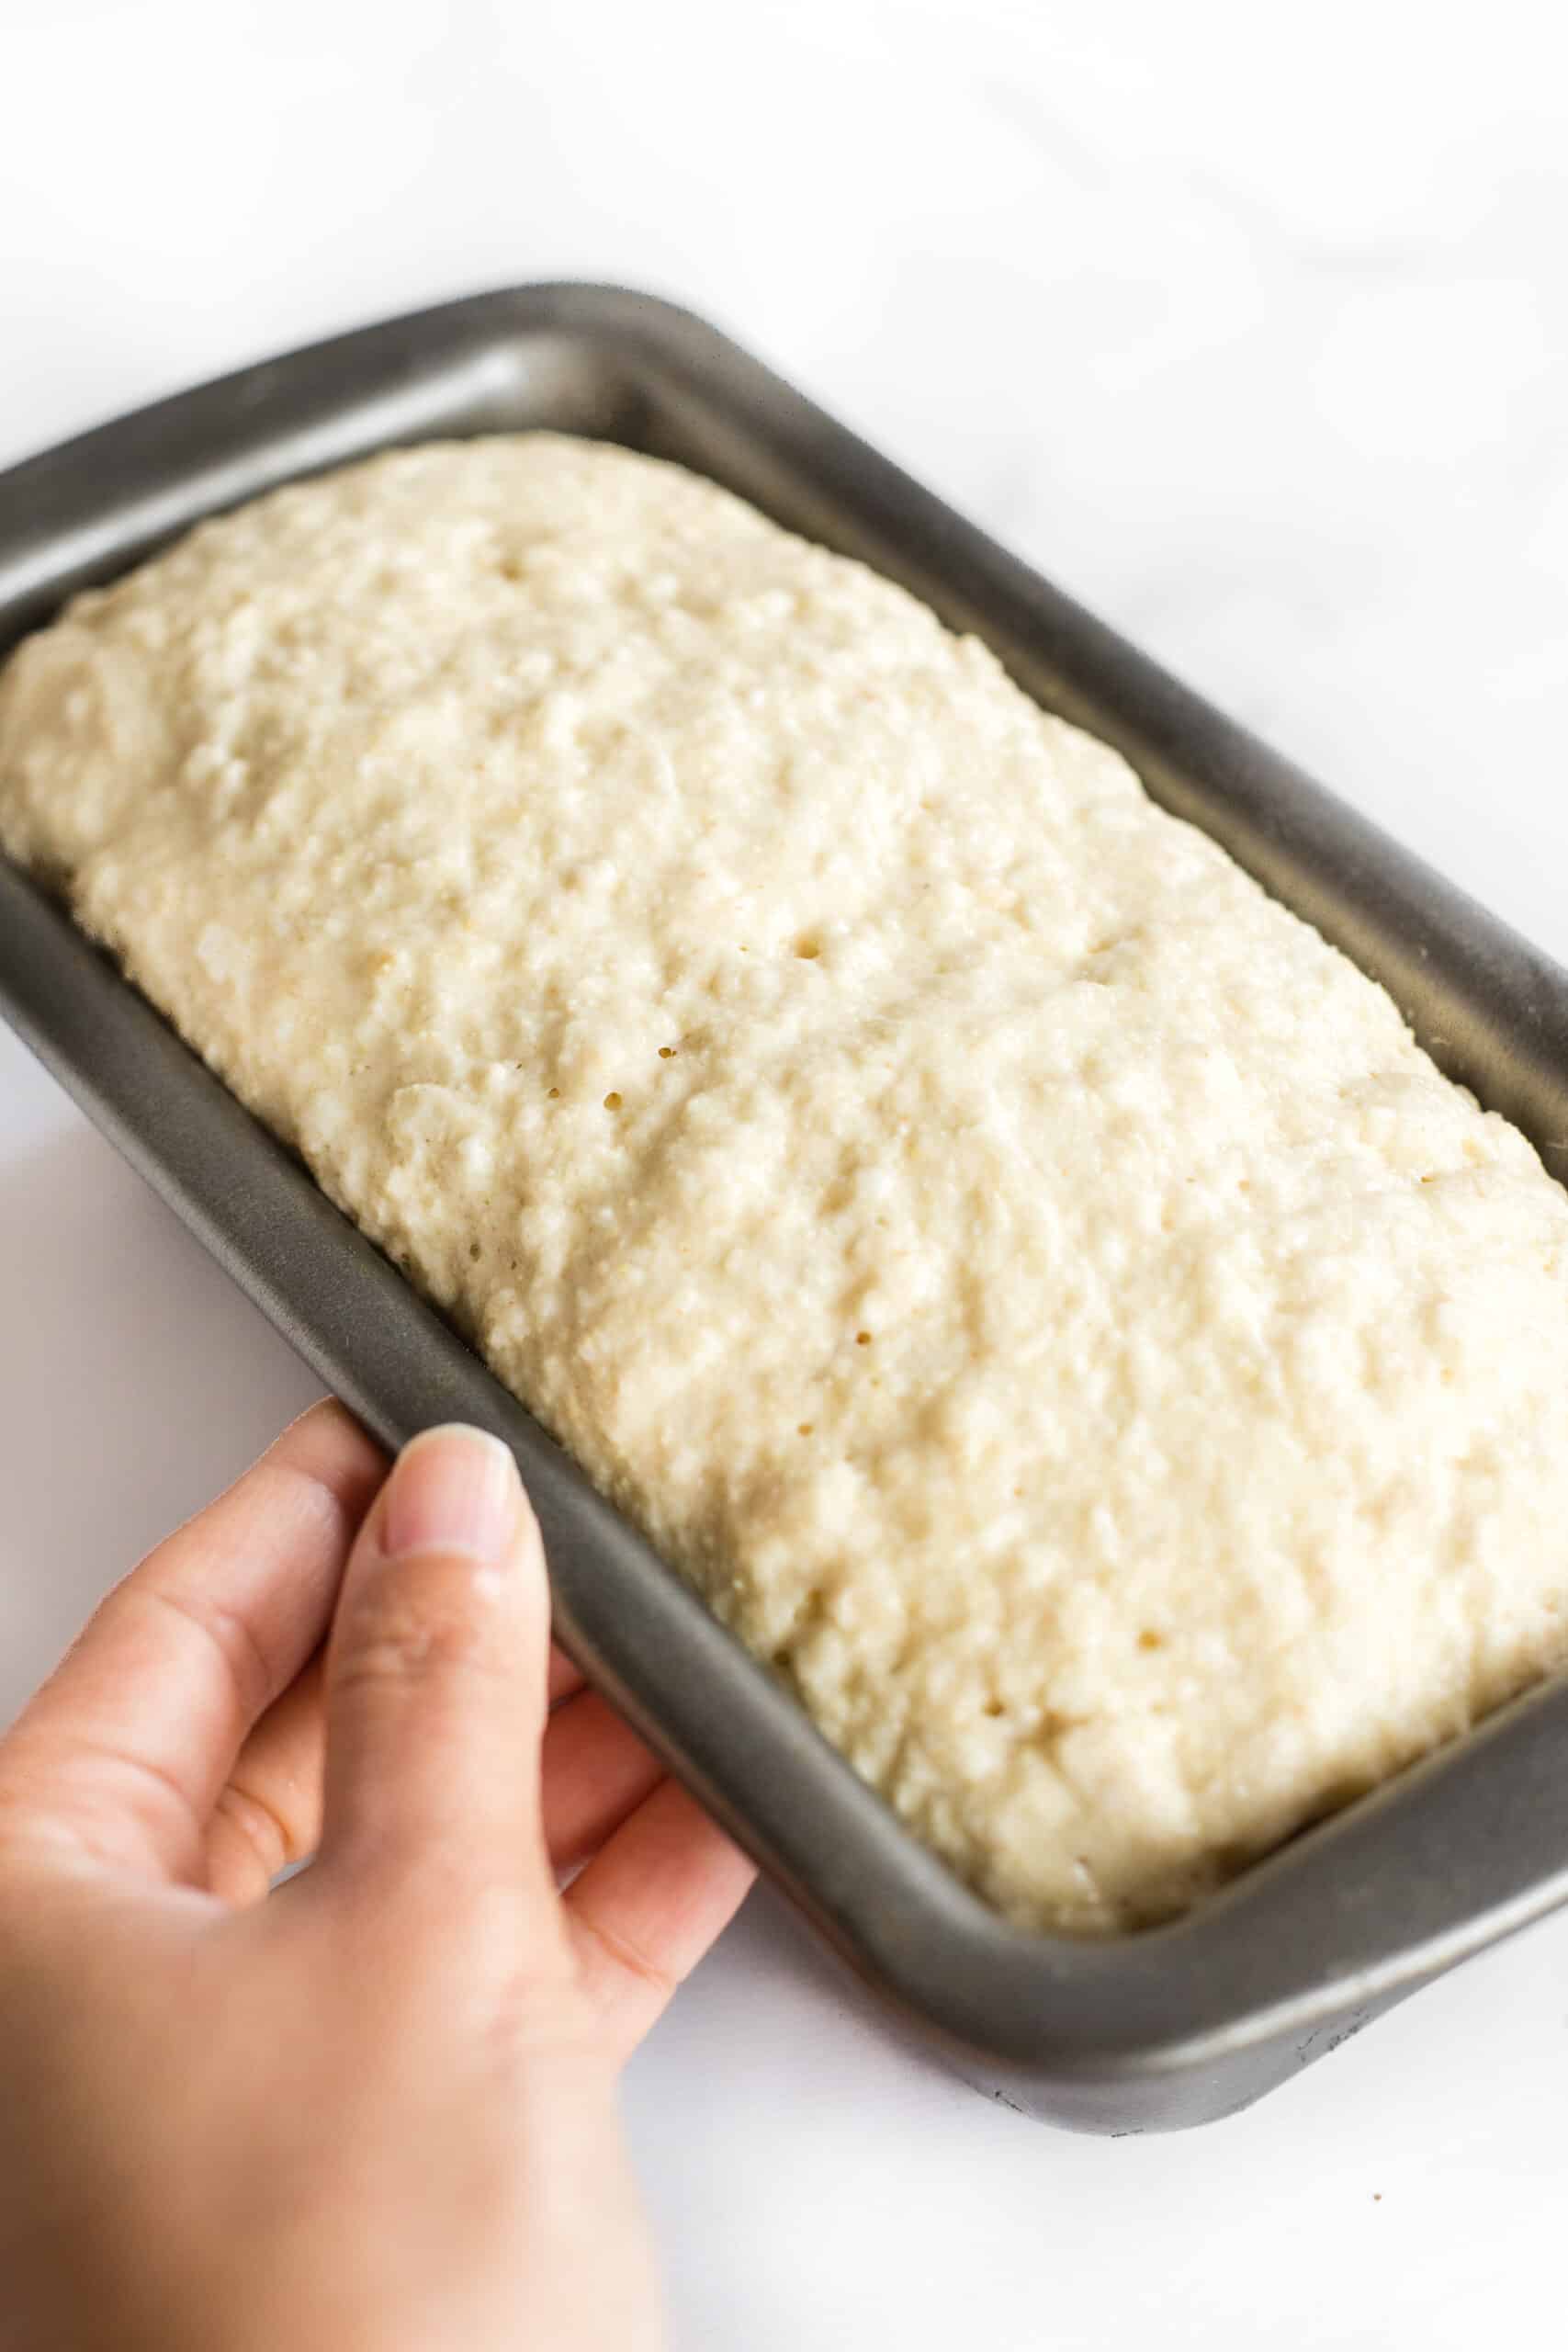 Holding a pan with rising bread dough.